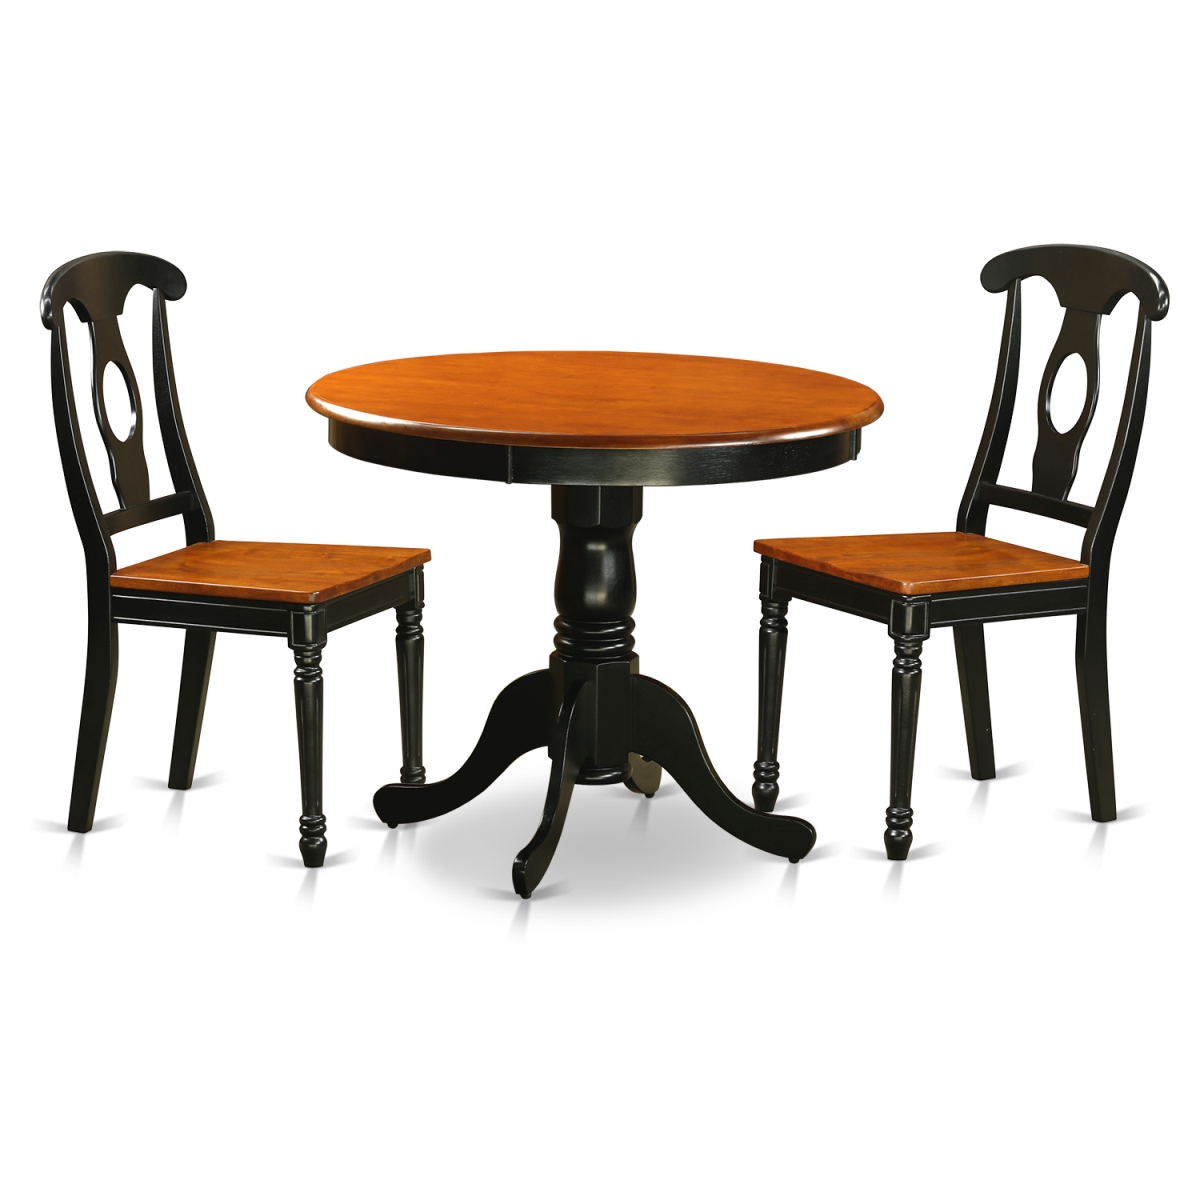 Picture of East West Furniture ANKE3-BLK-W Dining Room Set with 2 Wood Chairs, Black & Cherry - 3 Piece